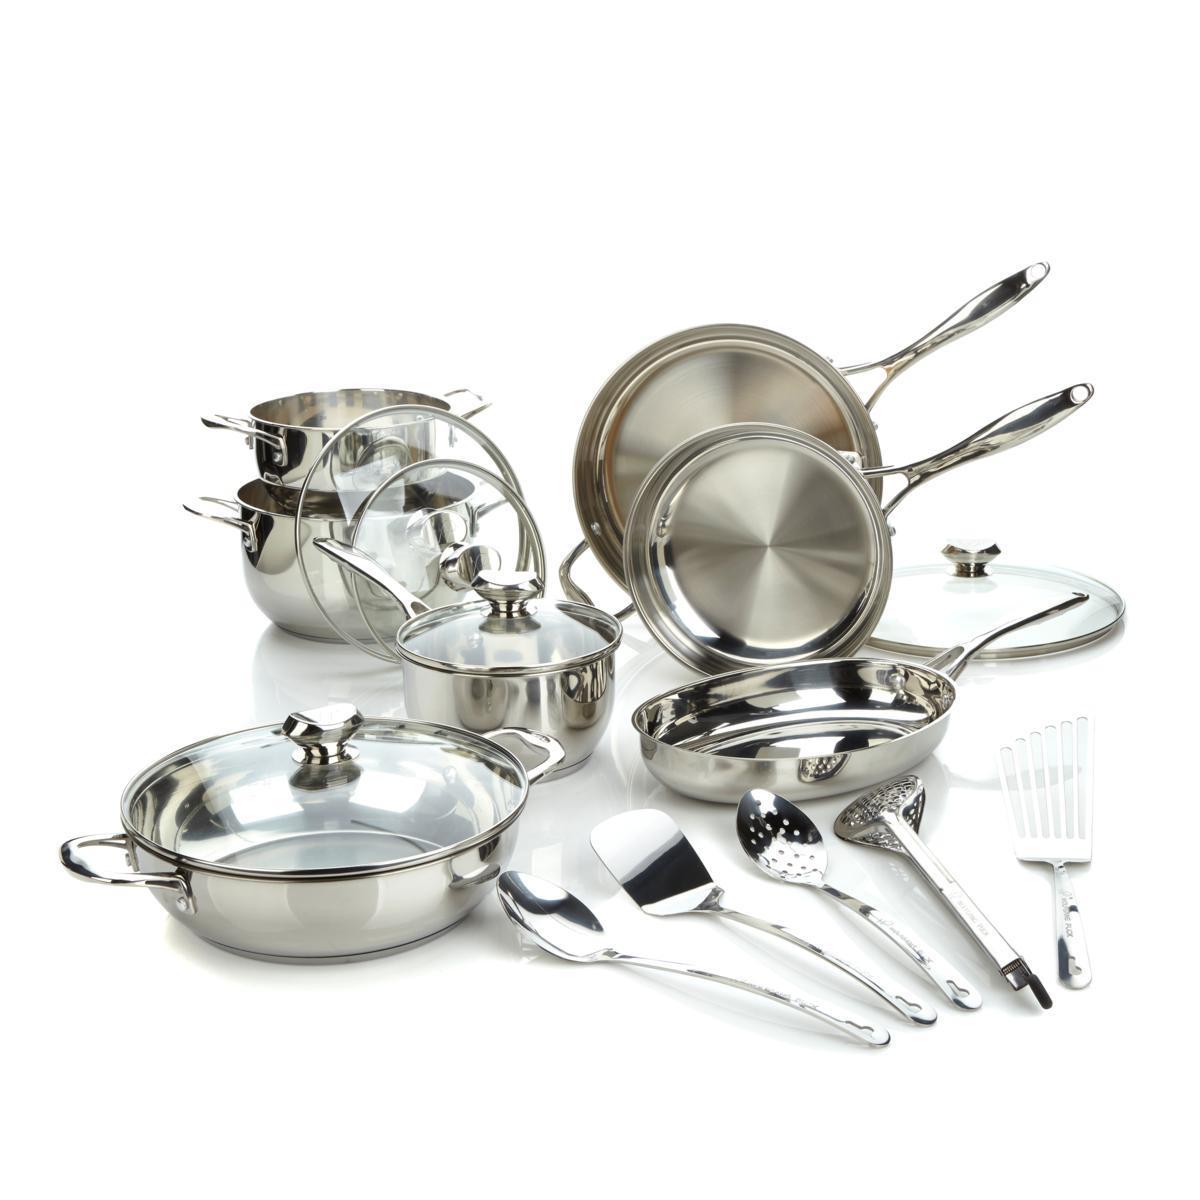 is wolfgang puck cookware oven safe